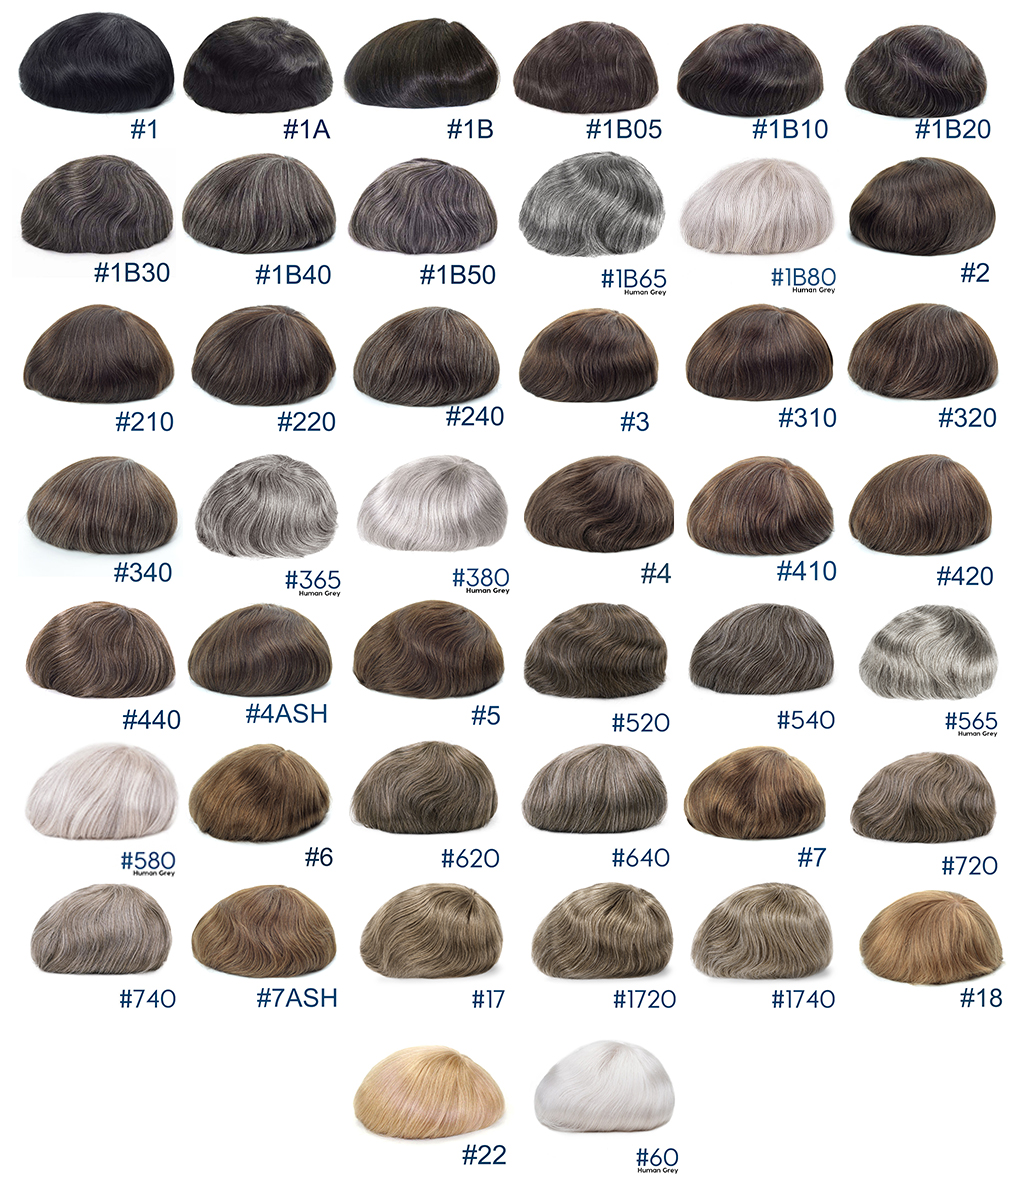 HS1V-1 V-loop hair system with 40 hair color options